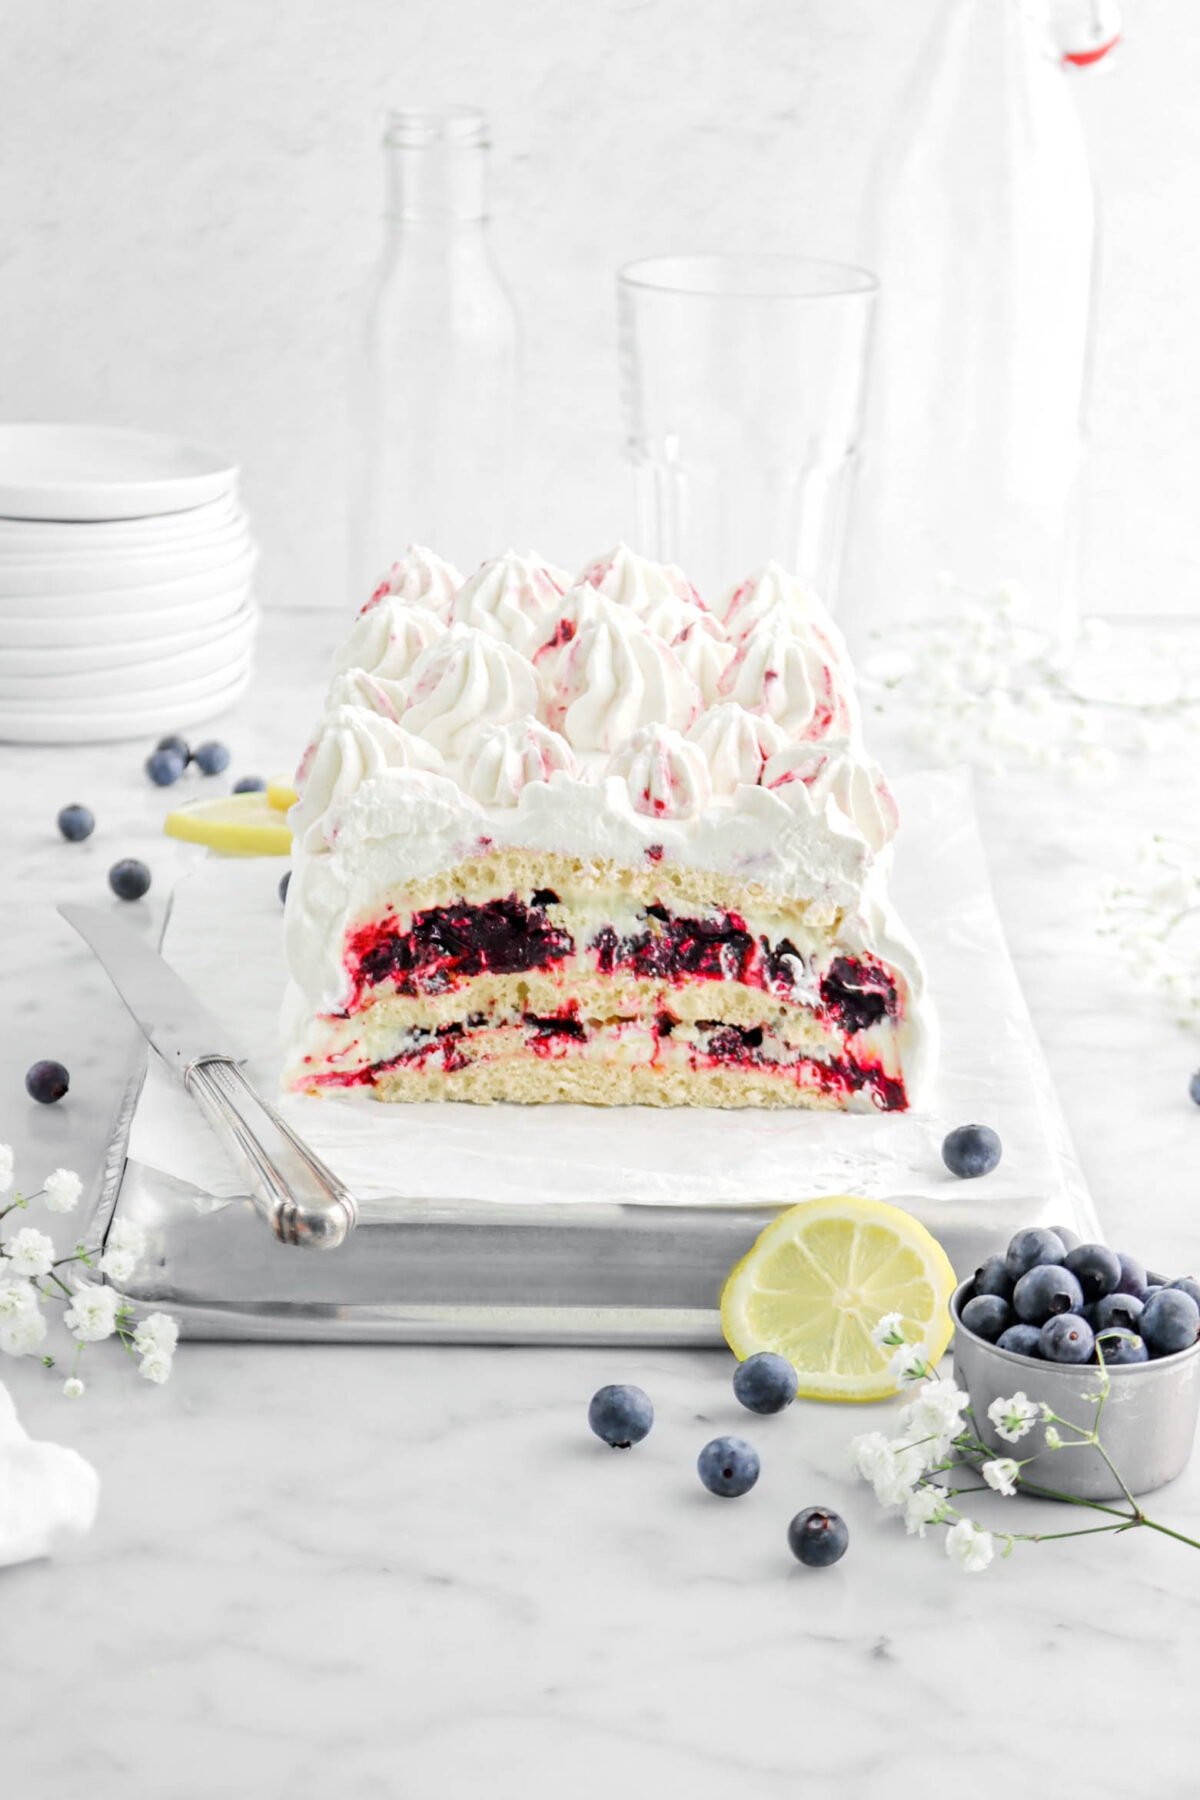 icebox cake on upside down sheet pan with layers of cake, mousse, and jam with a knife beside and blueberries around